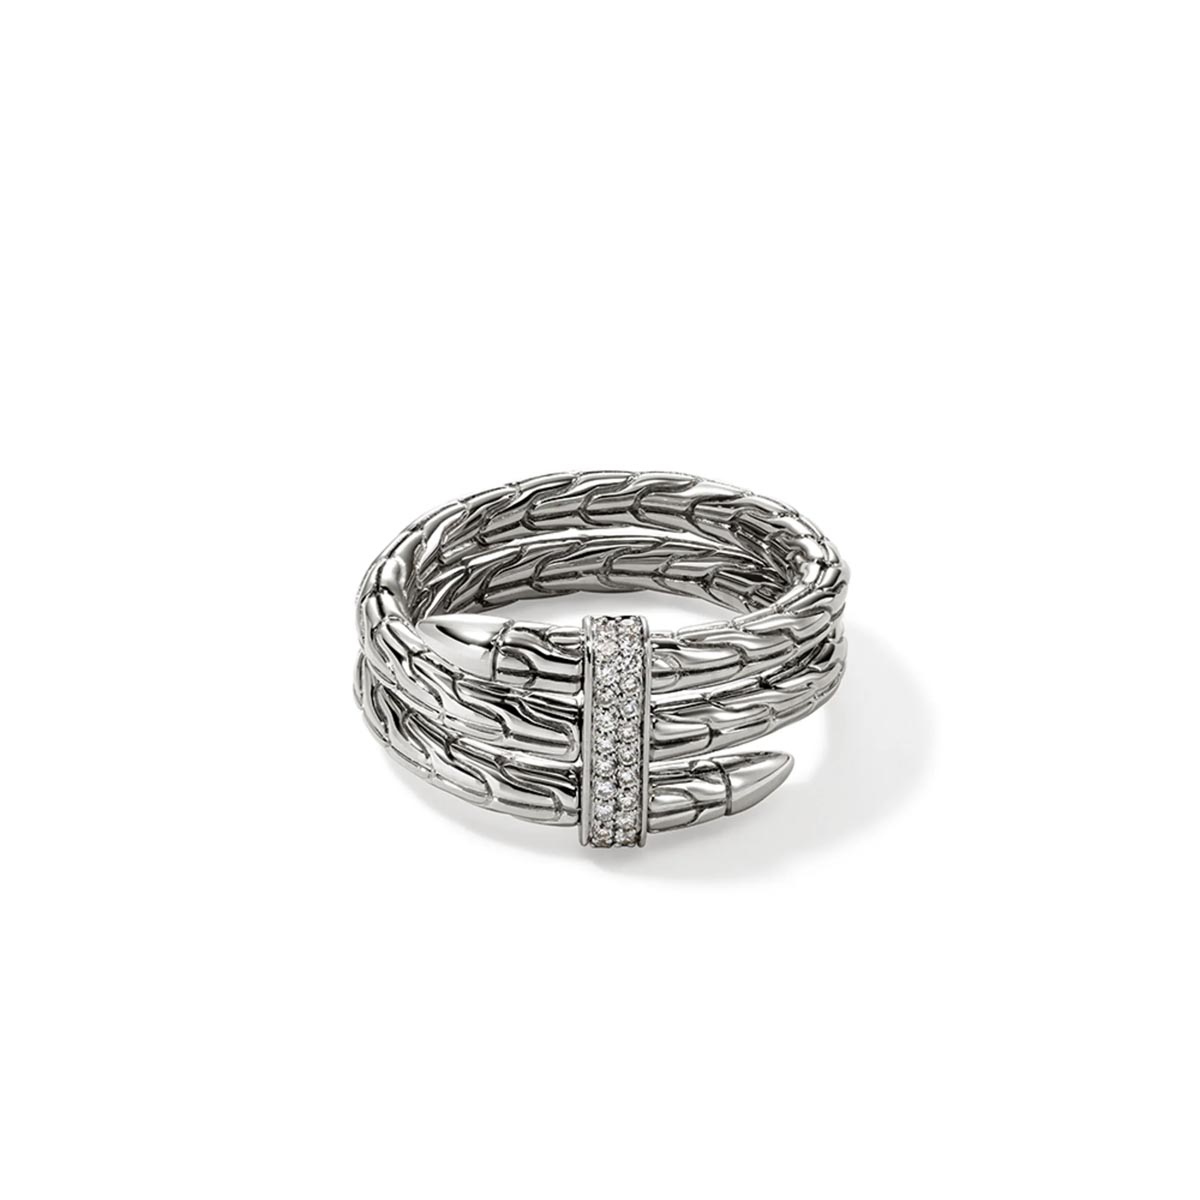 John Hardy Spear Collection Diamond Wrap Ring in Sterling Silver (size 7)